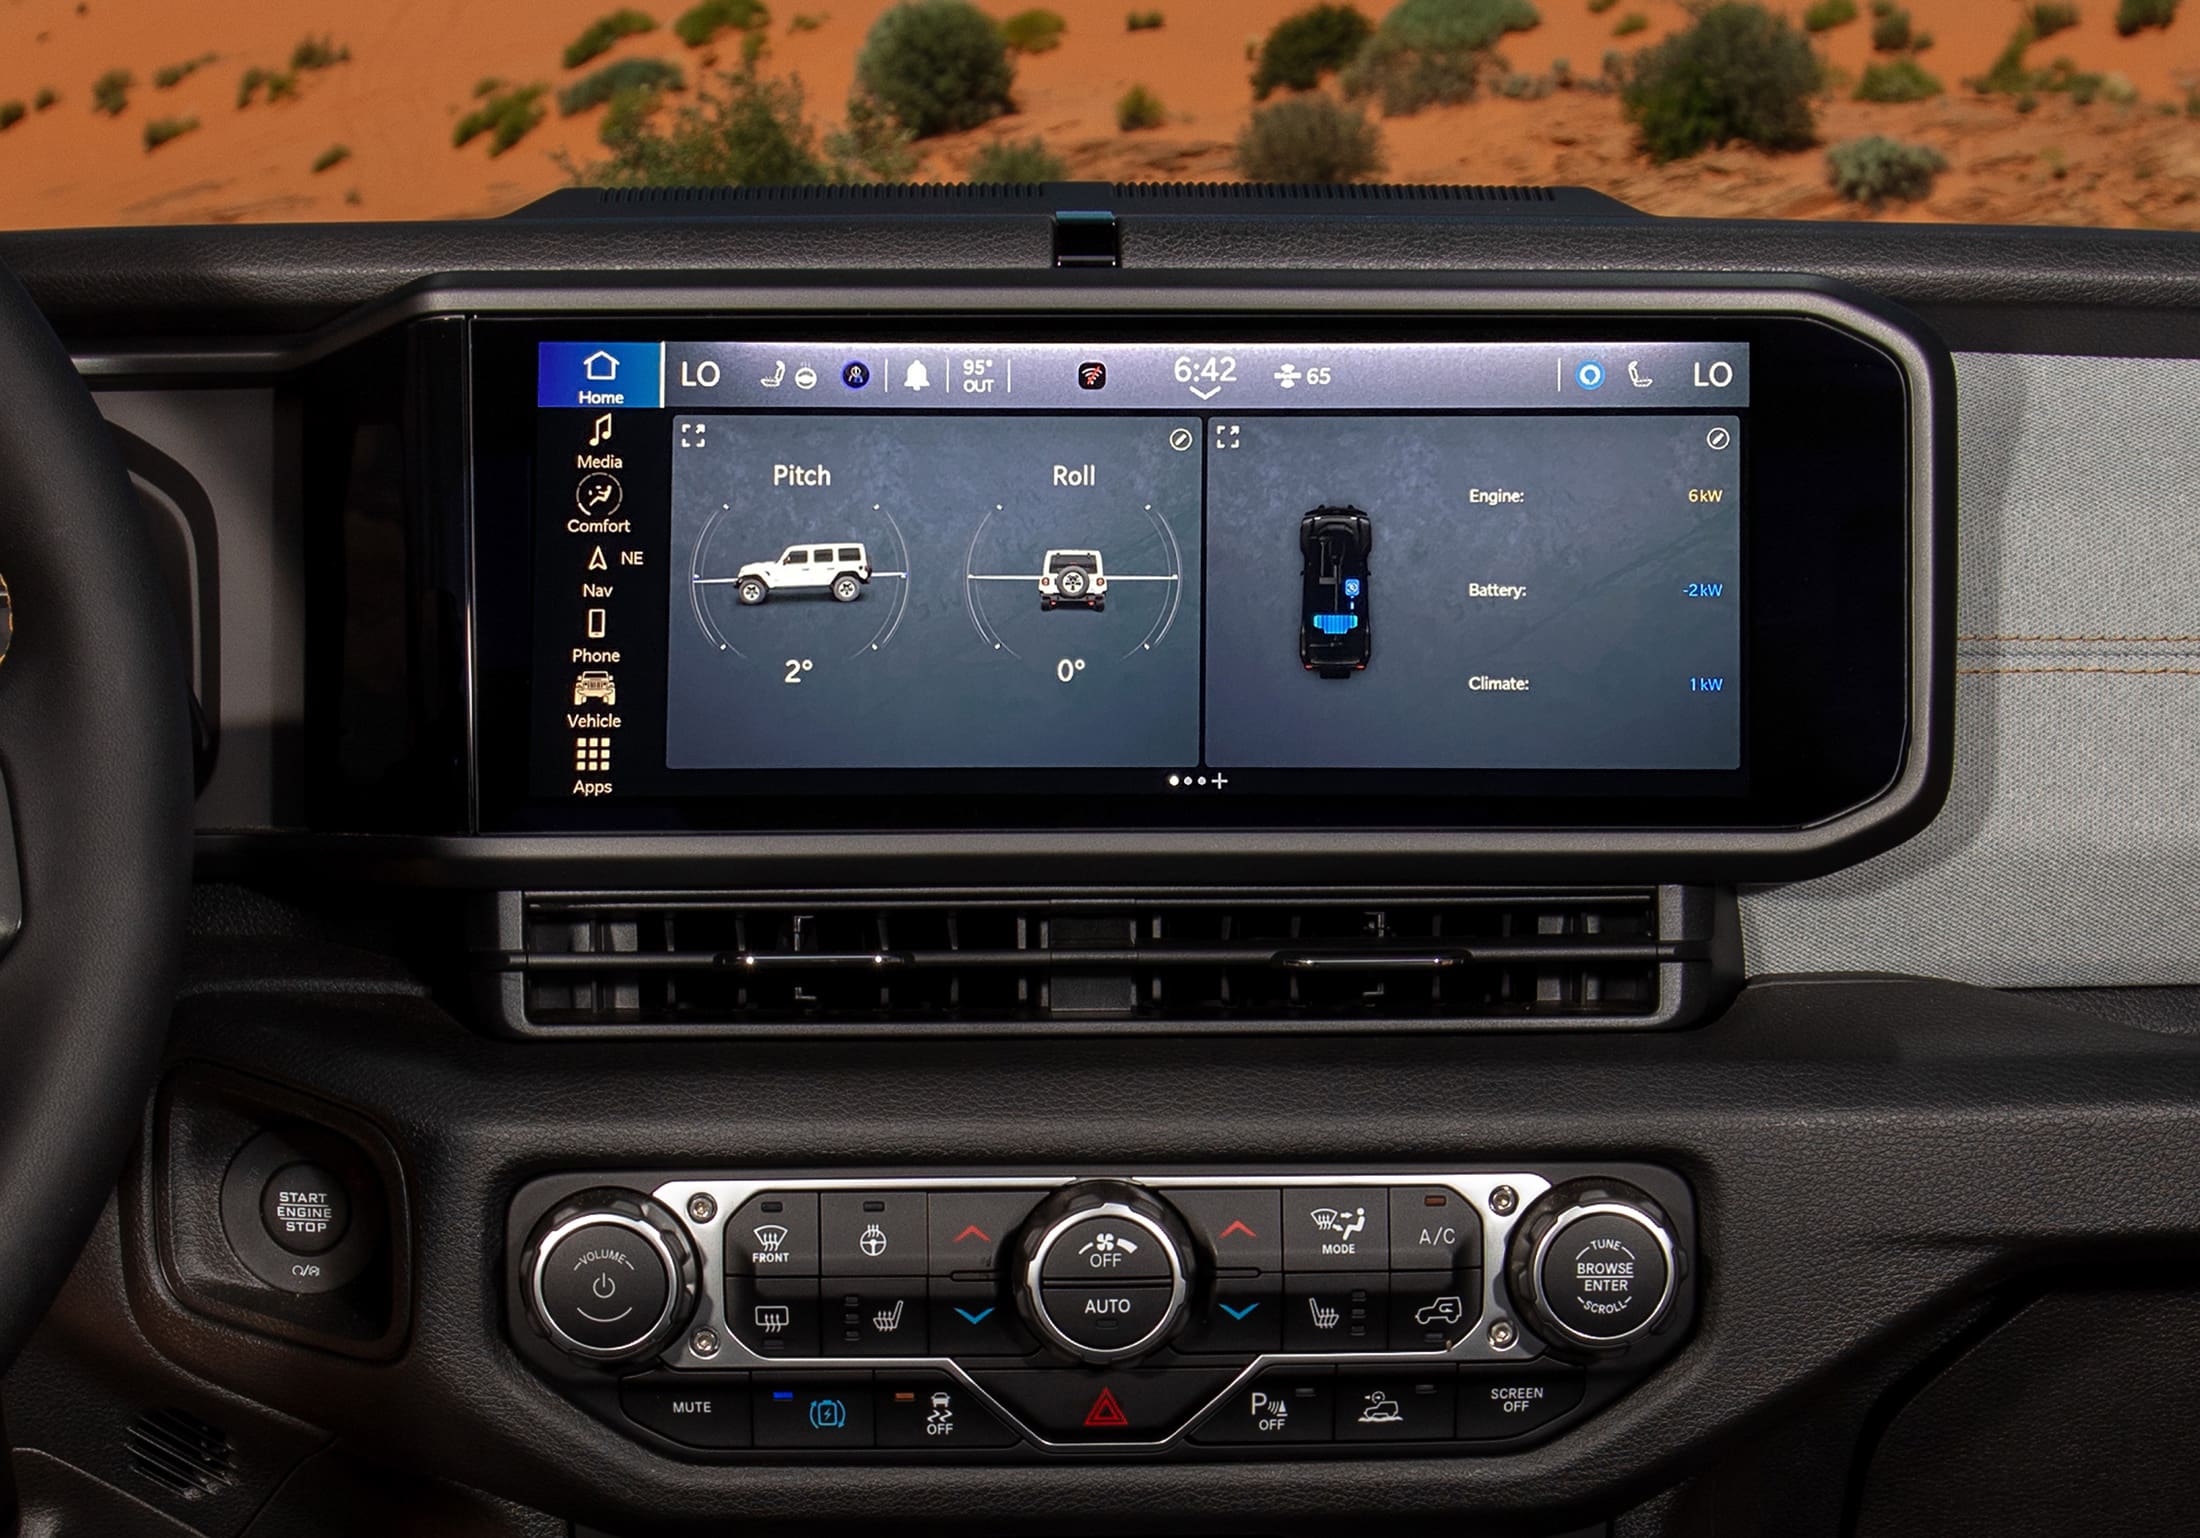 Photo of user interface screen in the front seat of a car. Screen displays aspects of the car